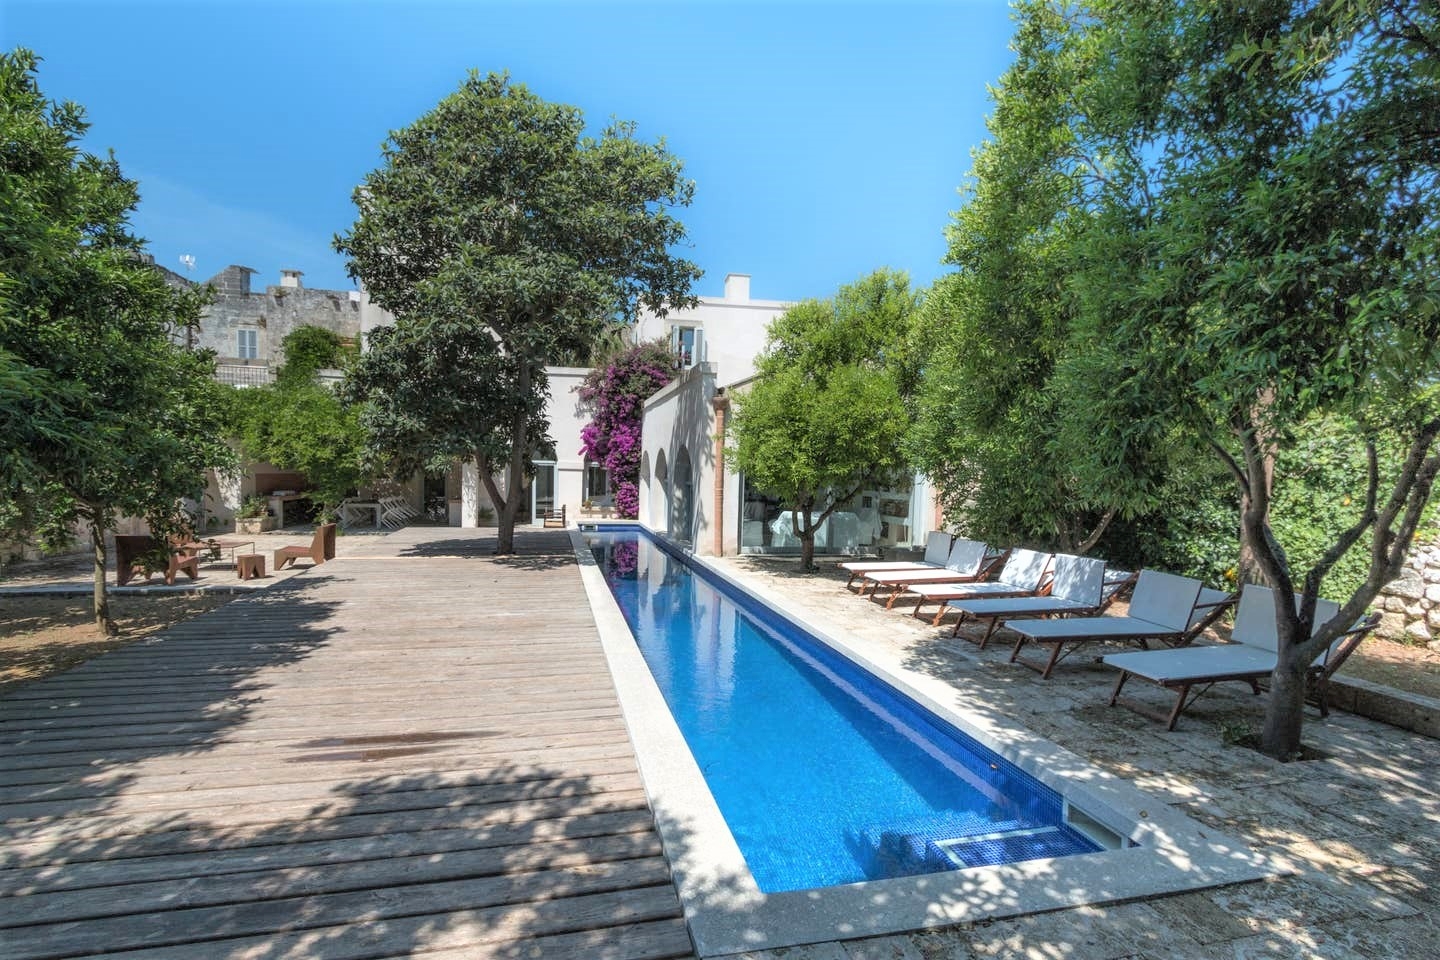 Long swimming pool and decking area with trees, sun loungers, flowers and view of house at Palazzo del Duca in Puglia, Italy